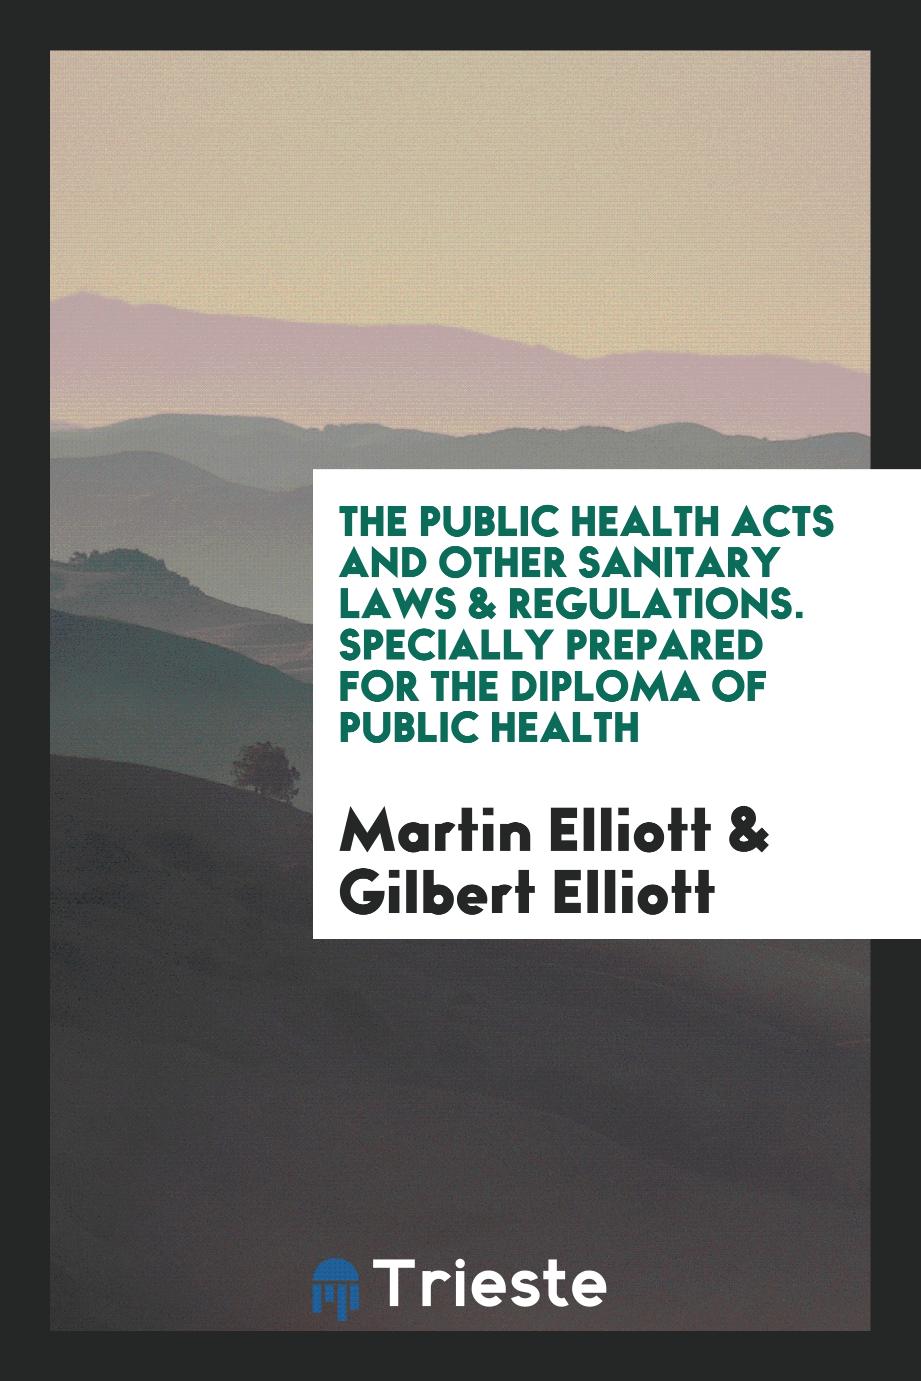 The public health acts and other sanitary laws & regulations. Specially prepared for the Diploma of public health